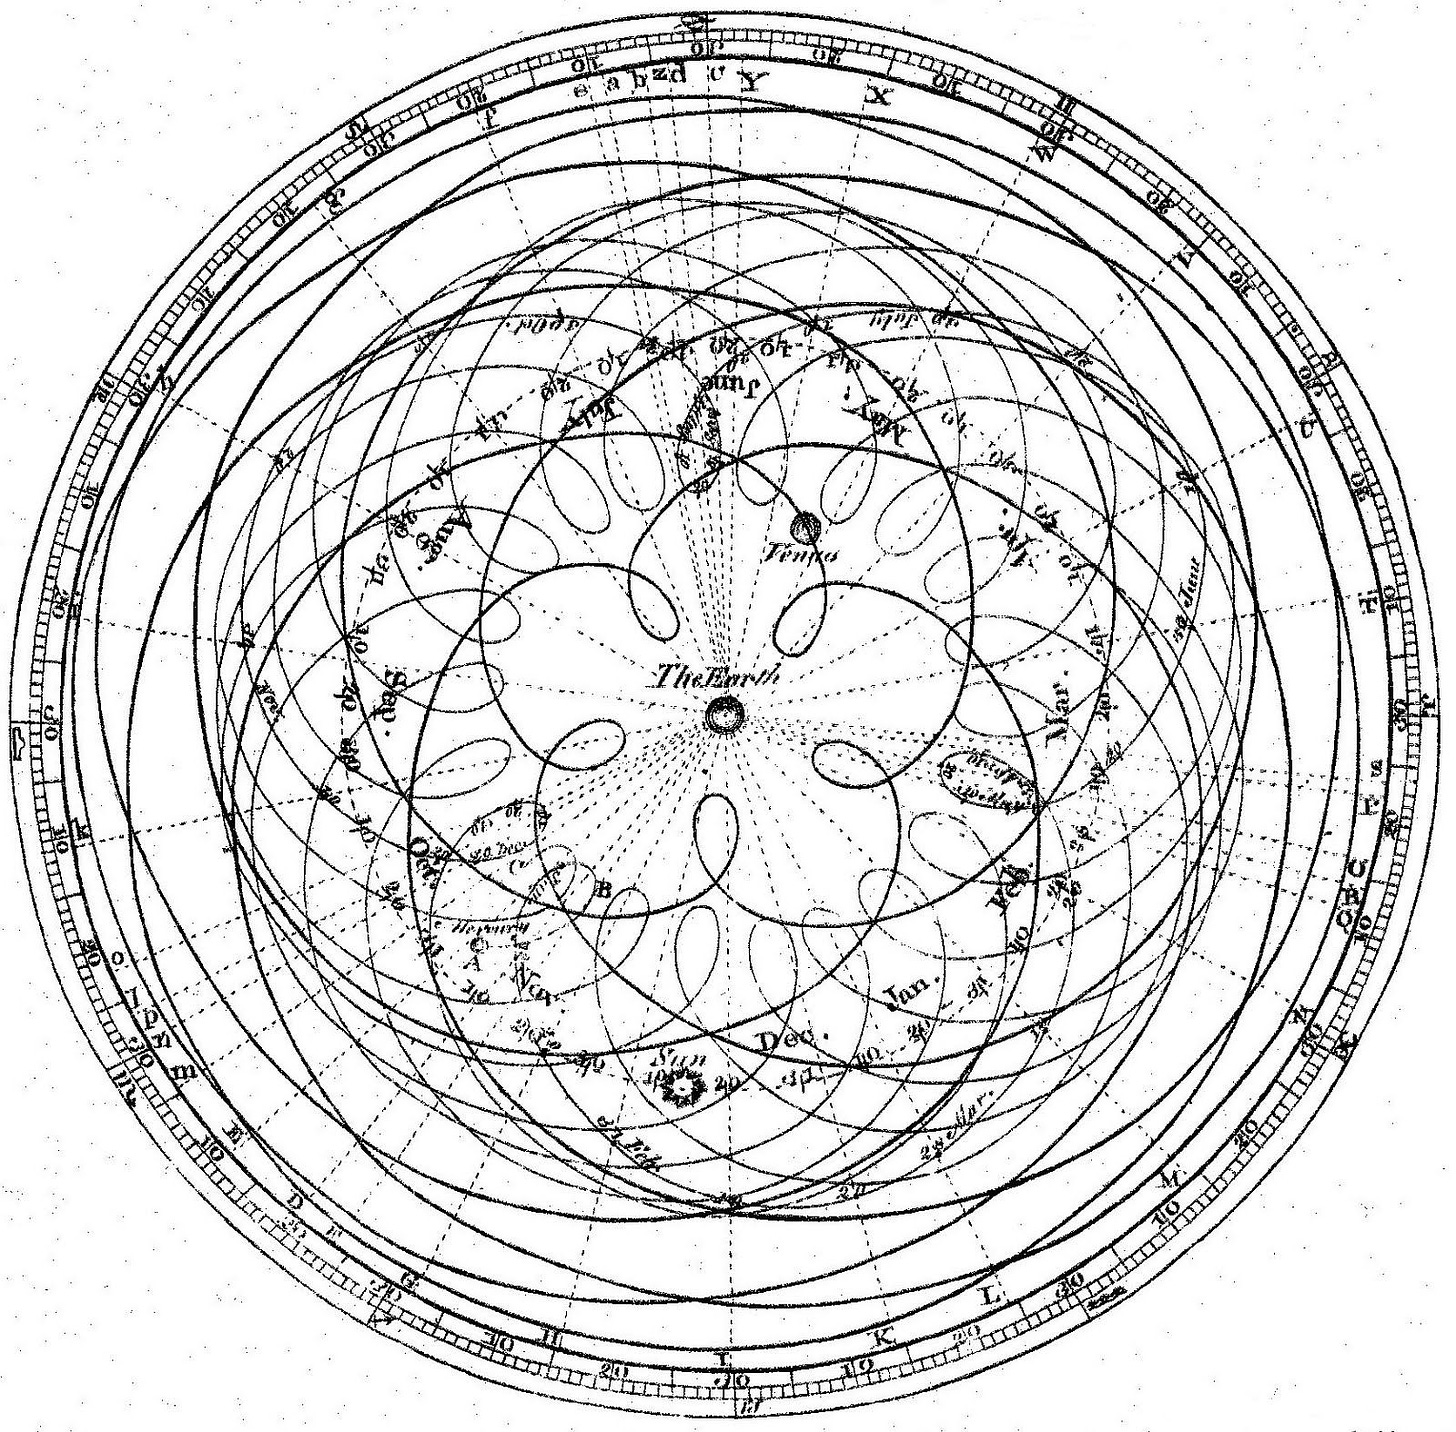 The Planet's Orbital Paths According to Ptolemy: How Johannes Kepler Helped  Land “Curiosity” On Mars (1600×1574) | Sacred geometry, Astronomy, Geometry